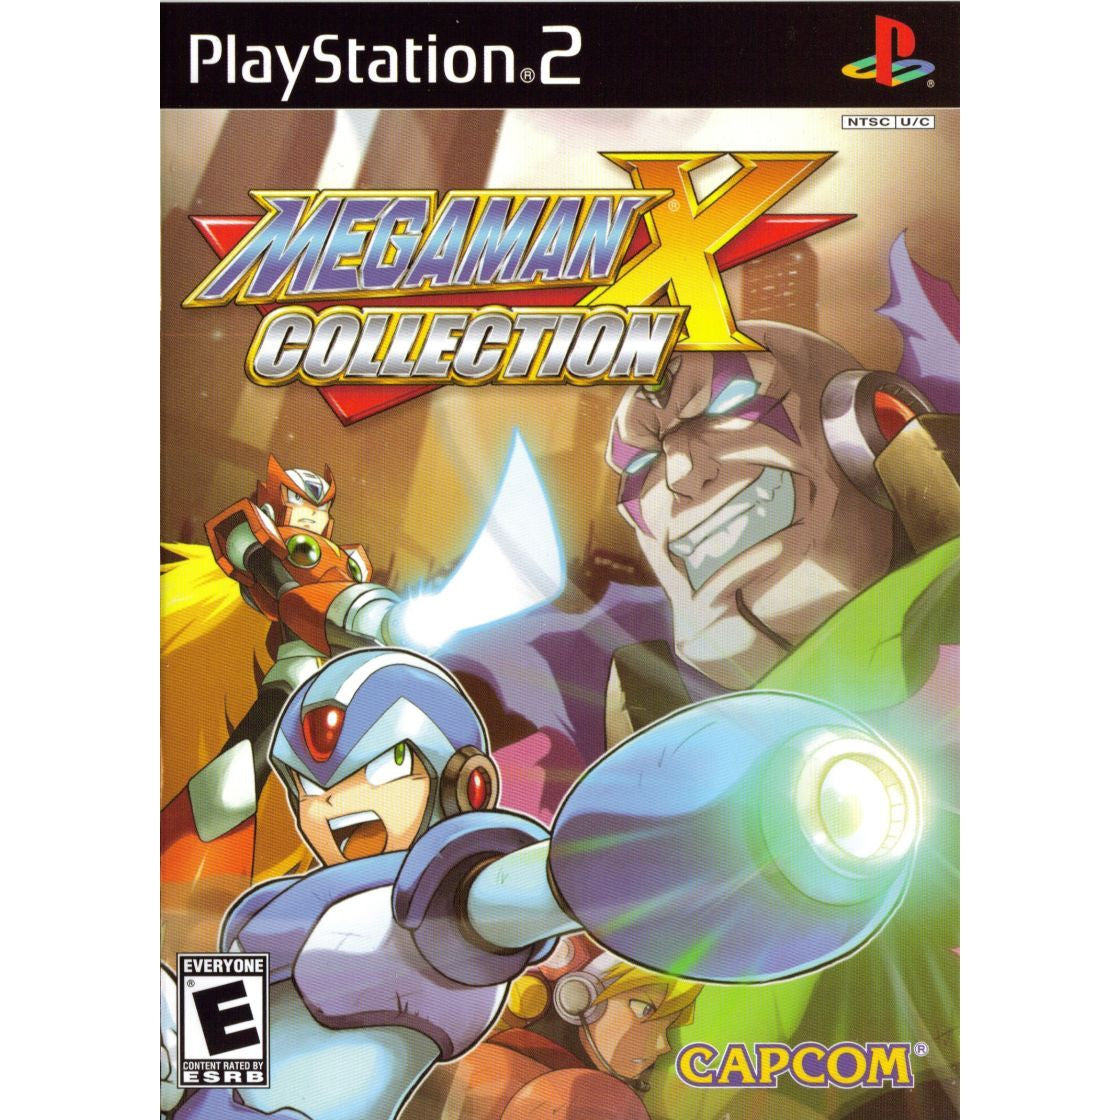 Mega Man X Collection - PlayStation 2 (PS2) Game Complete - YourGamingShop.com - Buy, Sell, Trade Video Games Online. 120 Day Warranty. Satisfaction Guaranteed.